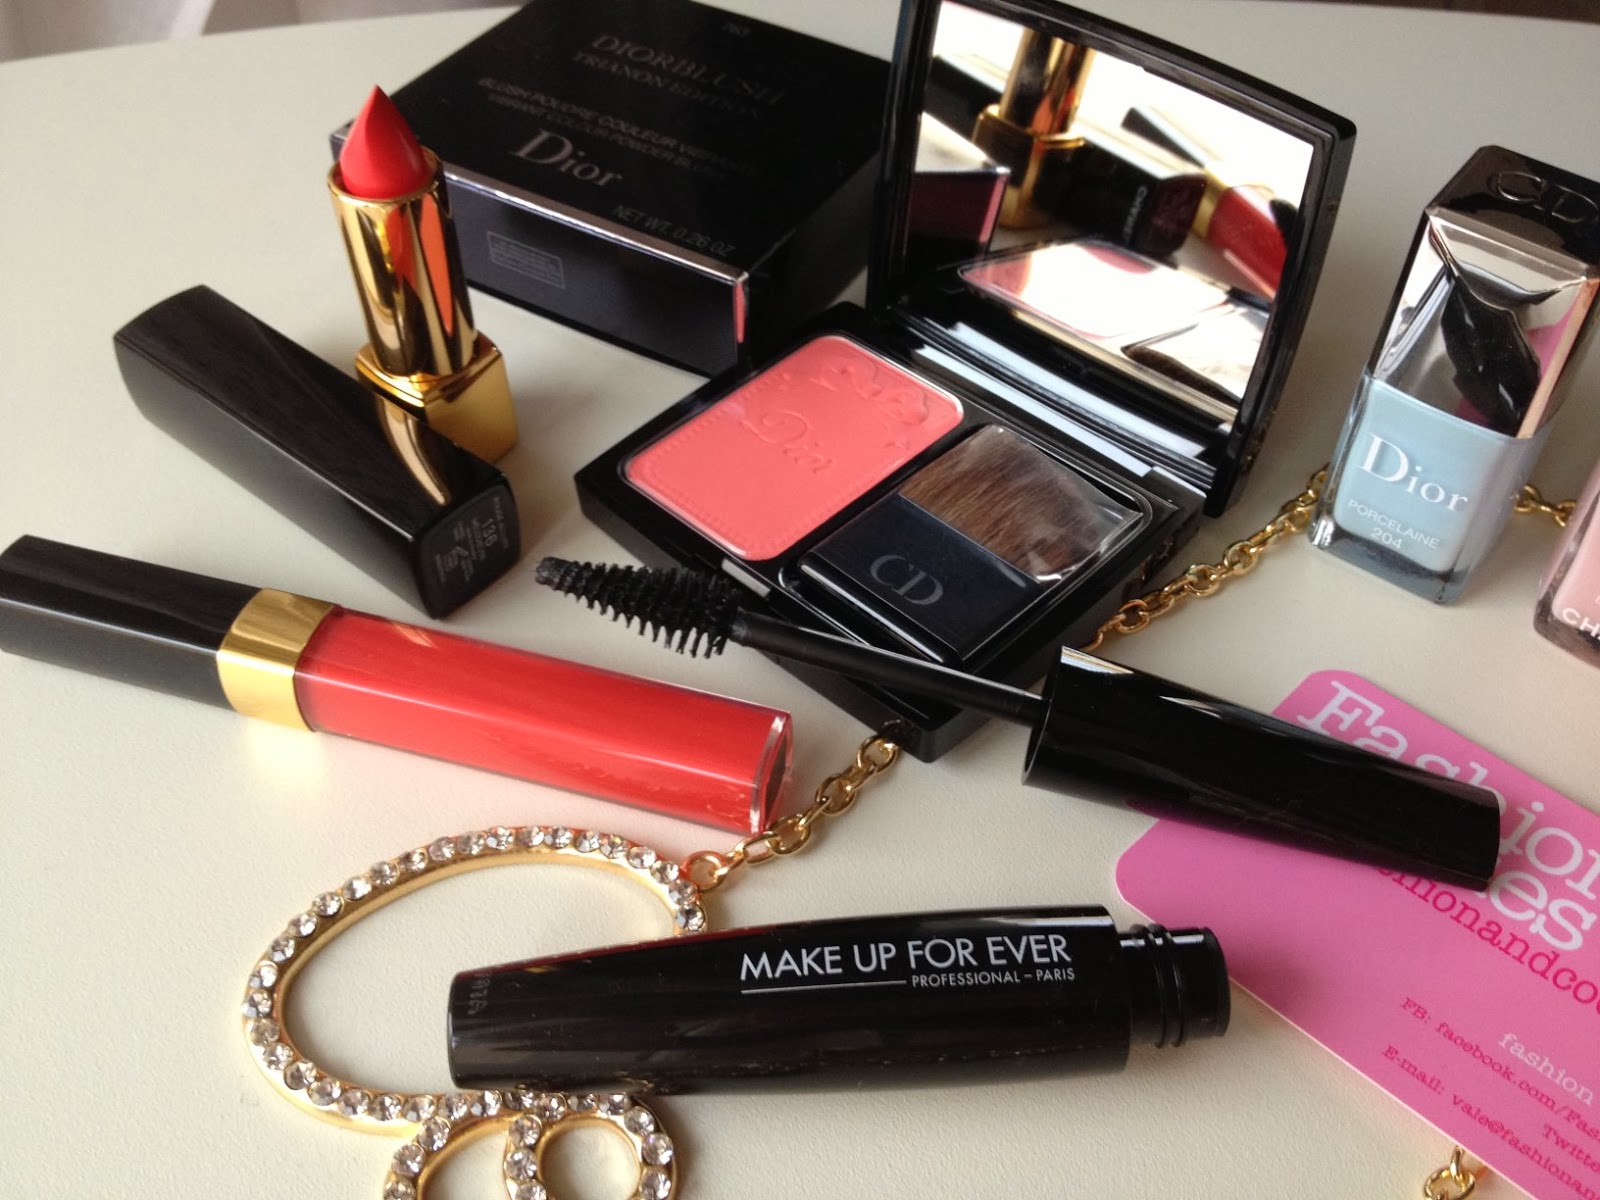 Dior Trianon Collection Spring 2014, Diorblush 763 corail bagatelle, Dior porcelain 204, Chanel rouge allure Melodieuse, Chanel lipgloss Sonate, Fashion and Cookies